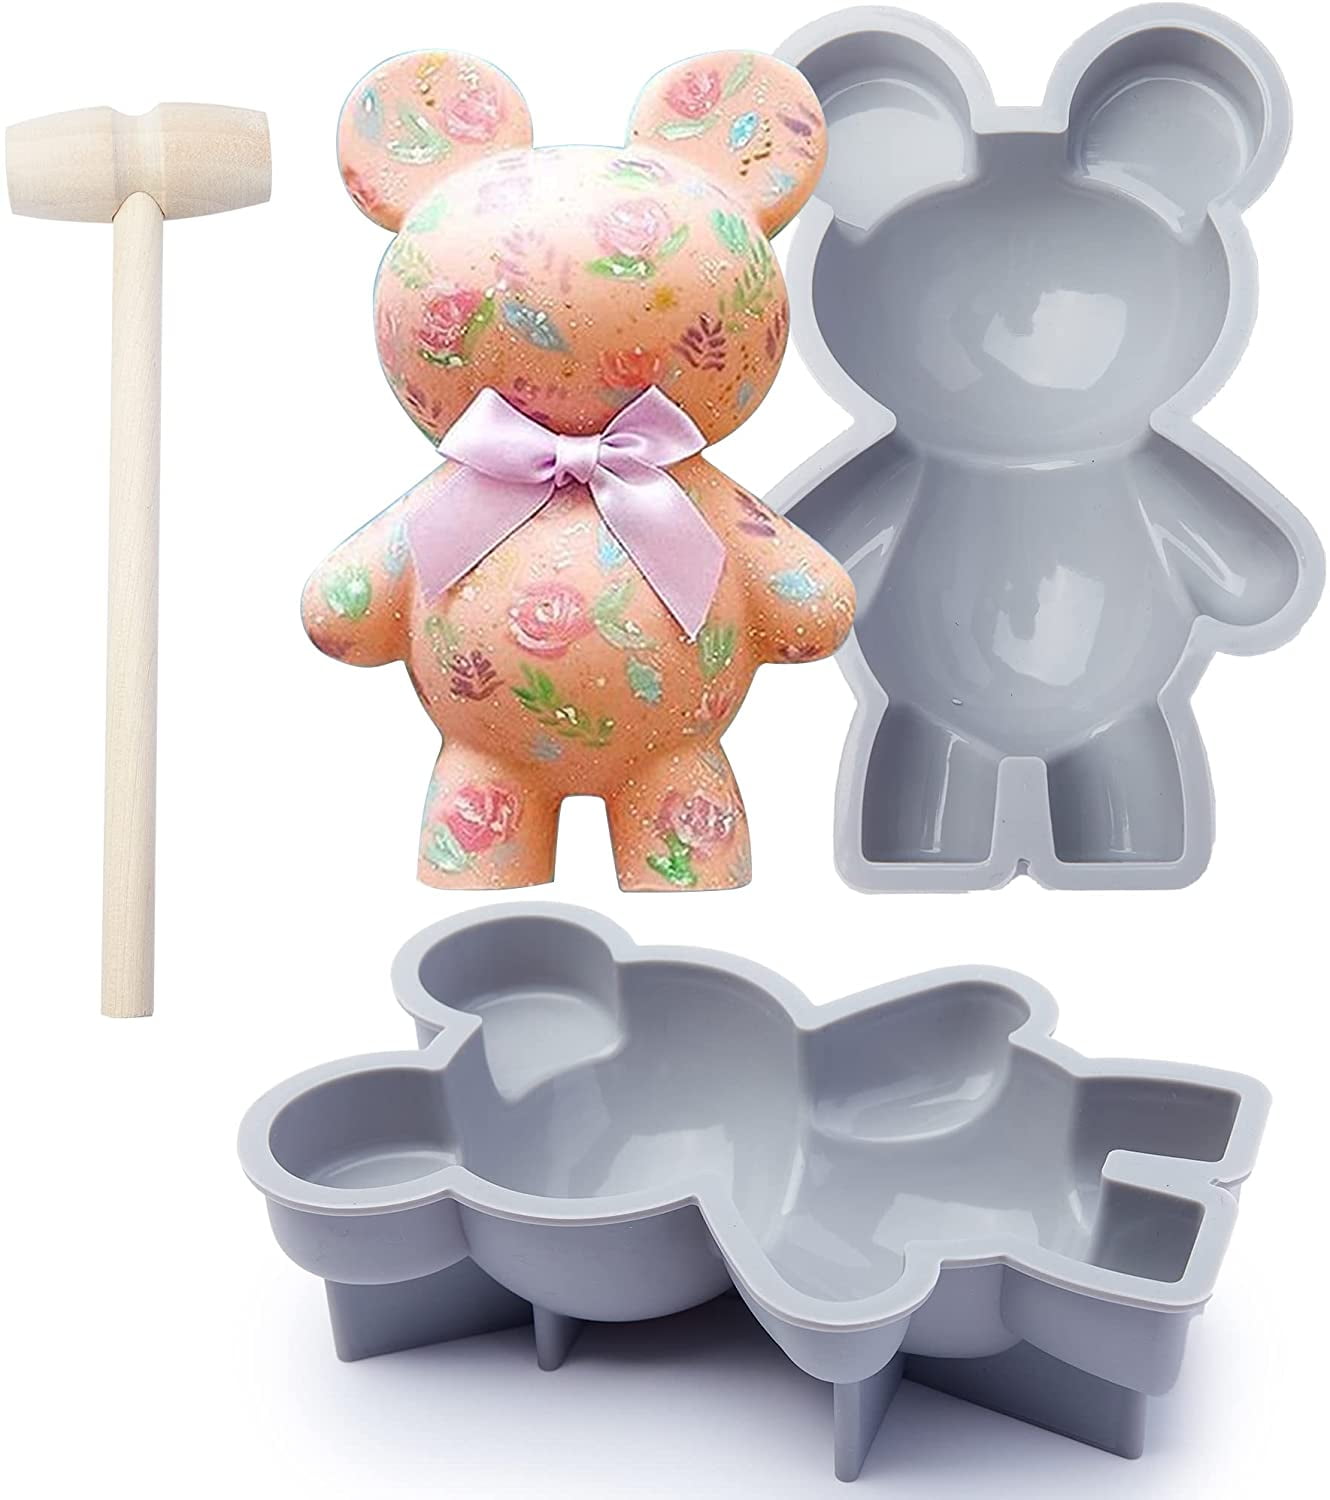 AIERSA Bear Chocolate Silicone Molds, 2Pcs 3D Bear Breakable Mold with  Hammer for Smash Bears, Candy Molds,Mousse Cake, Dessert Baking,Jello, Big